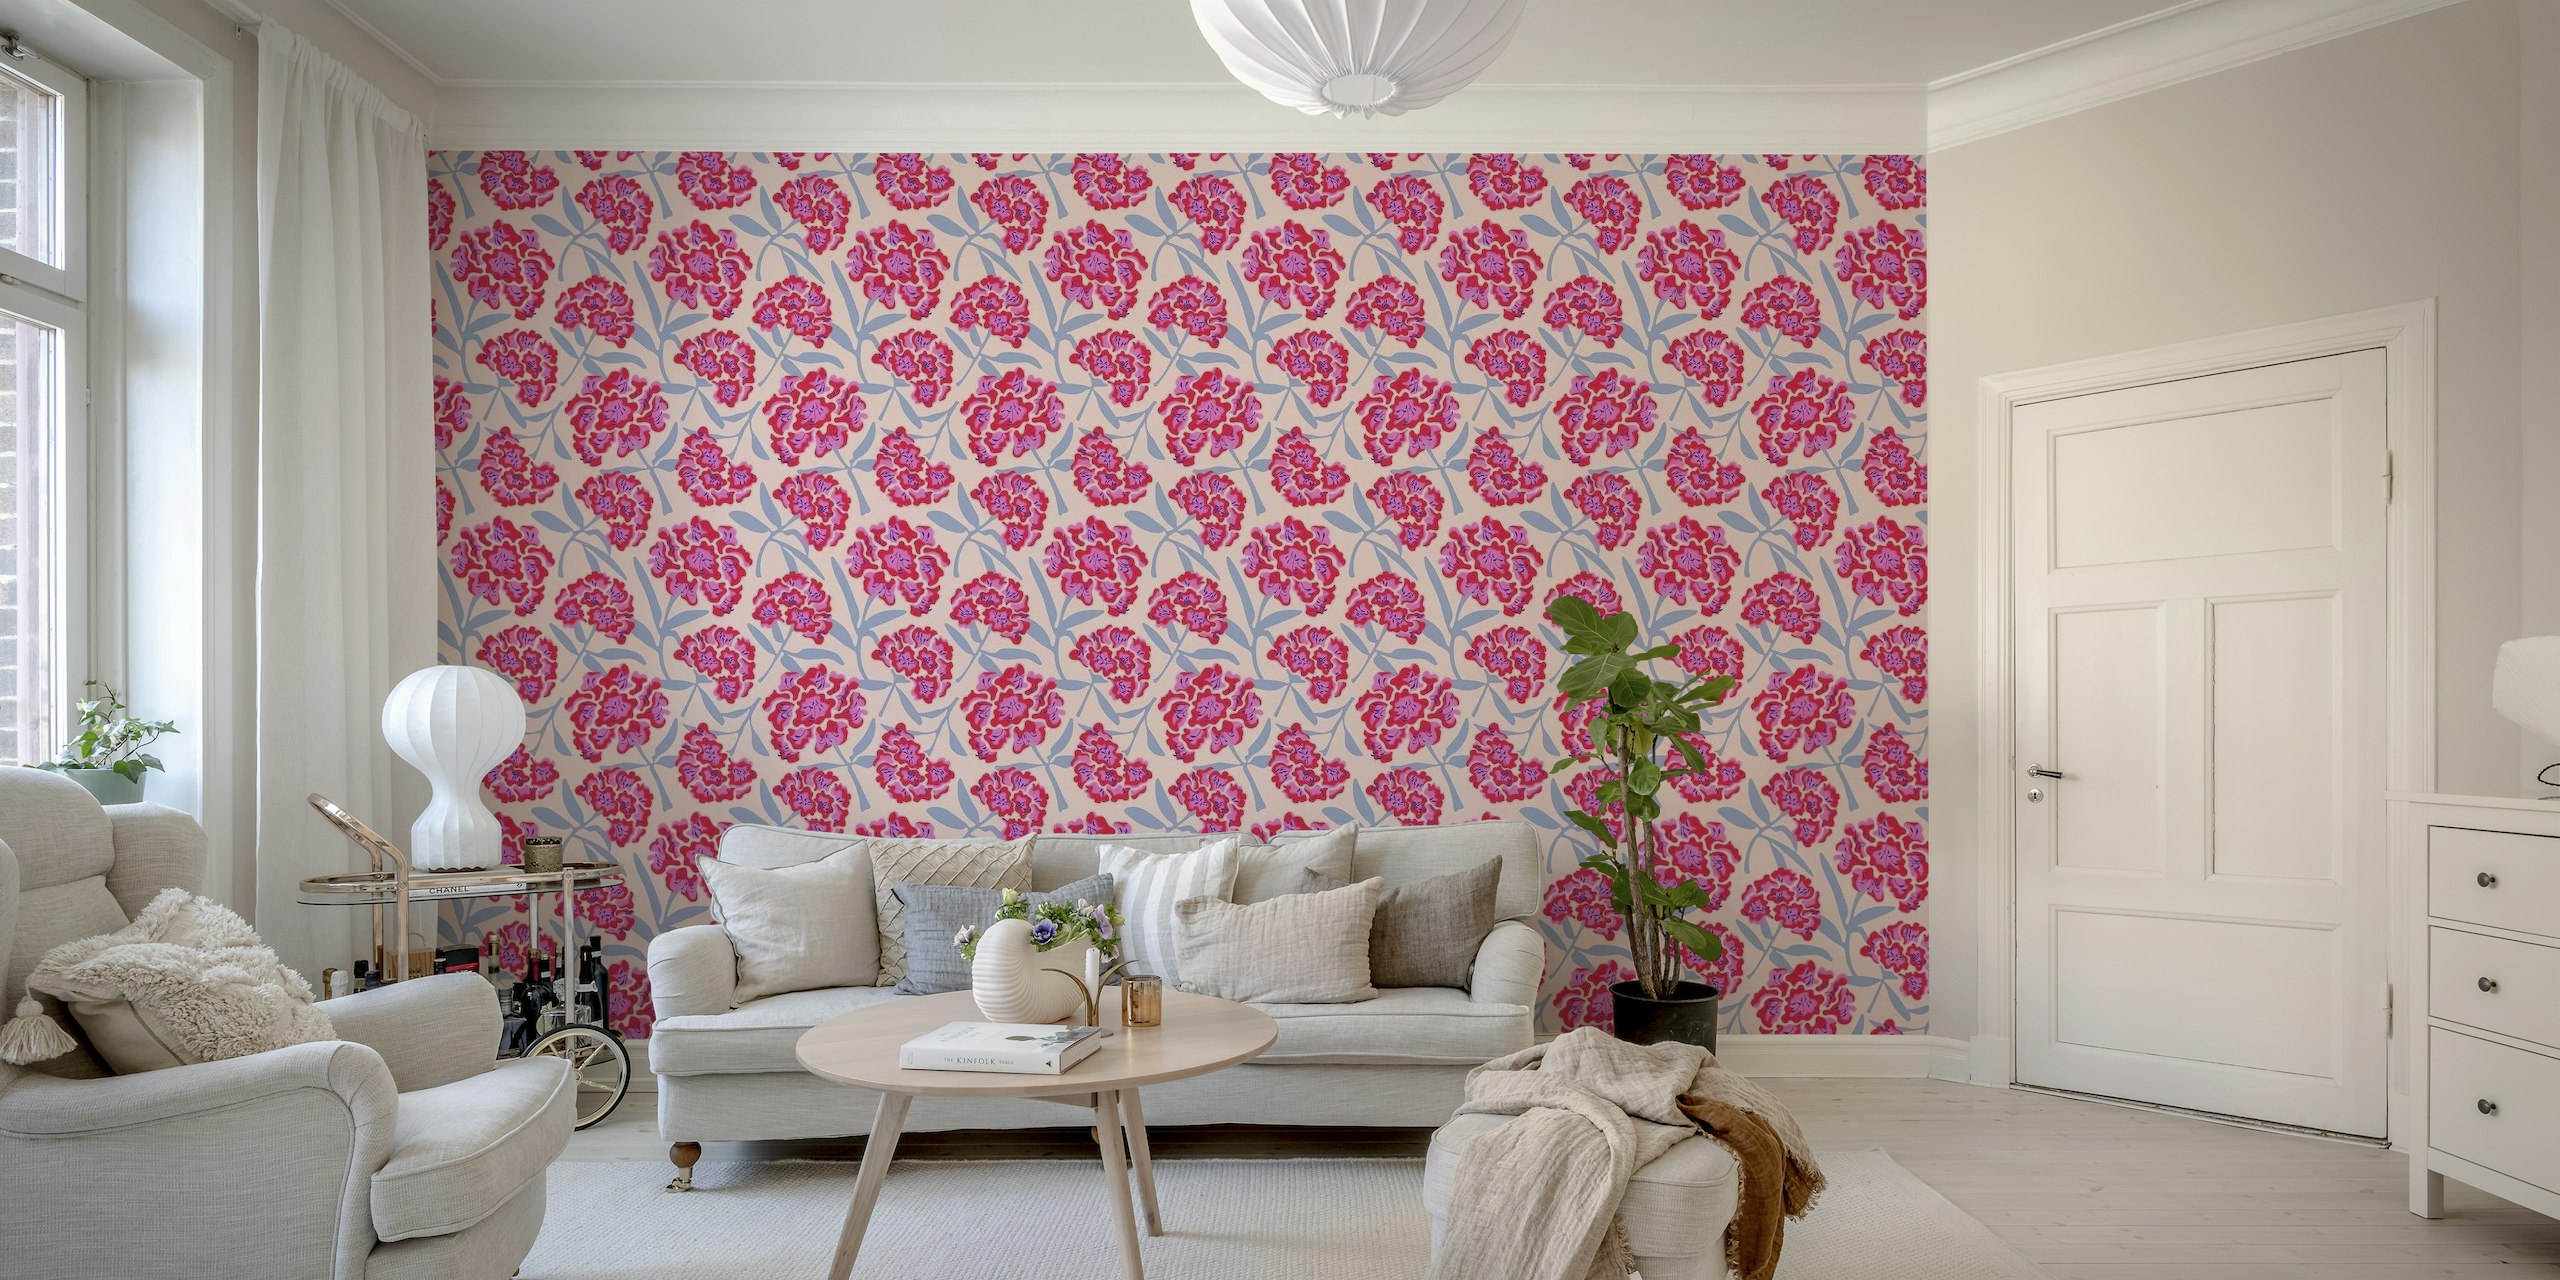 RHODODENDRONS Retro Floral Fuchsia Pink Large wallpaper